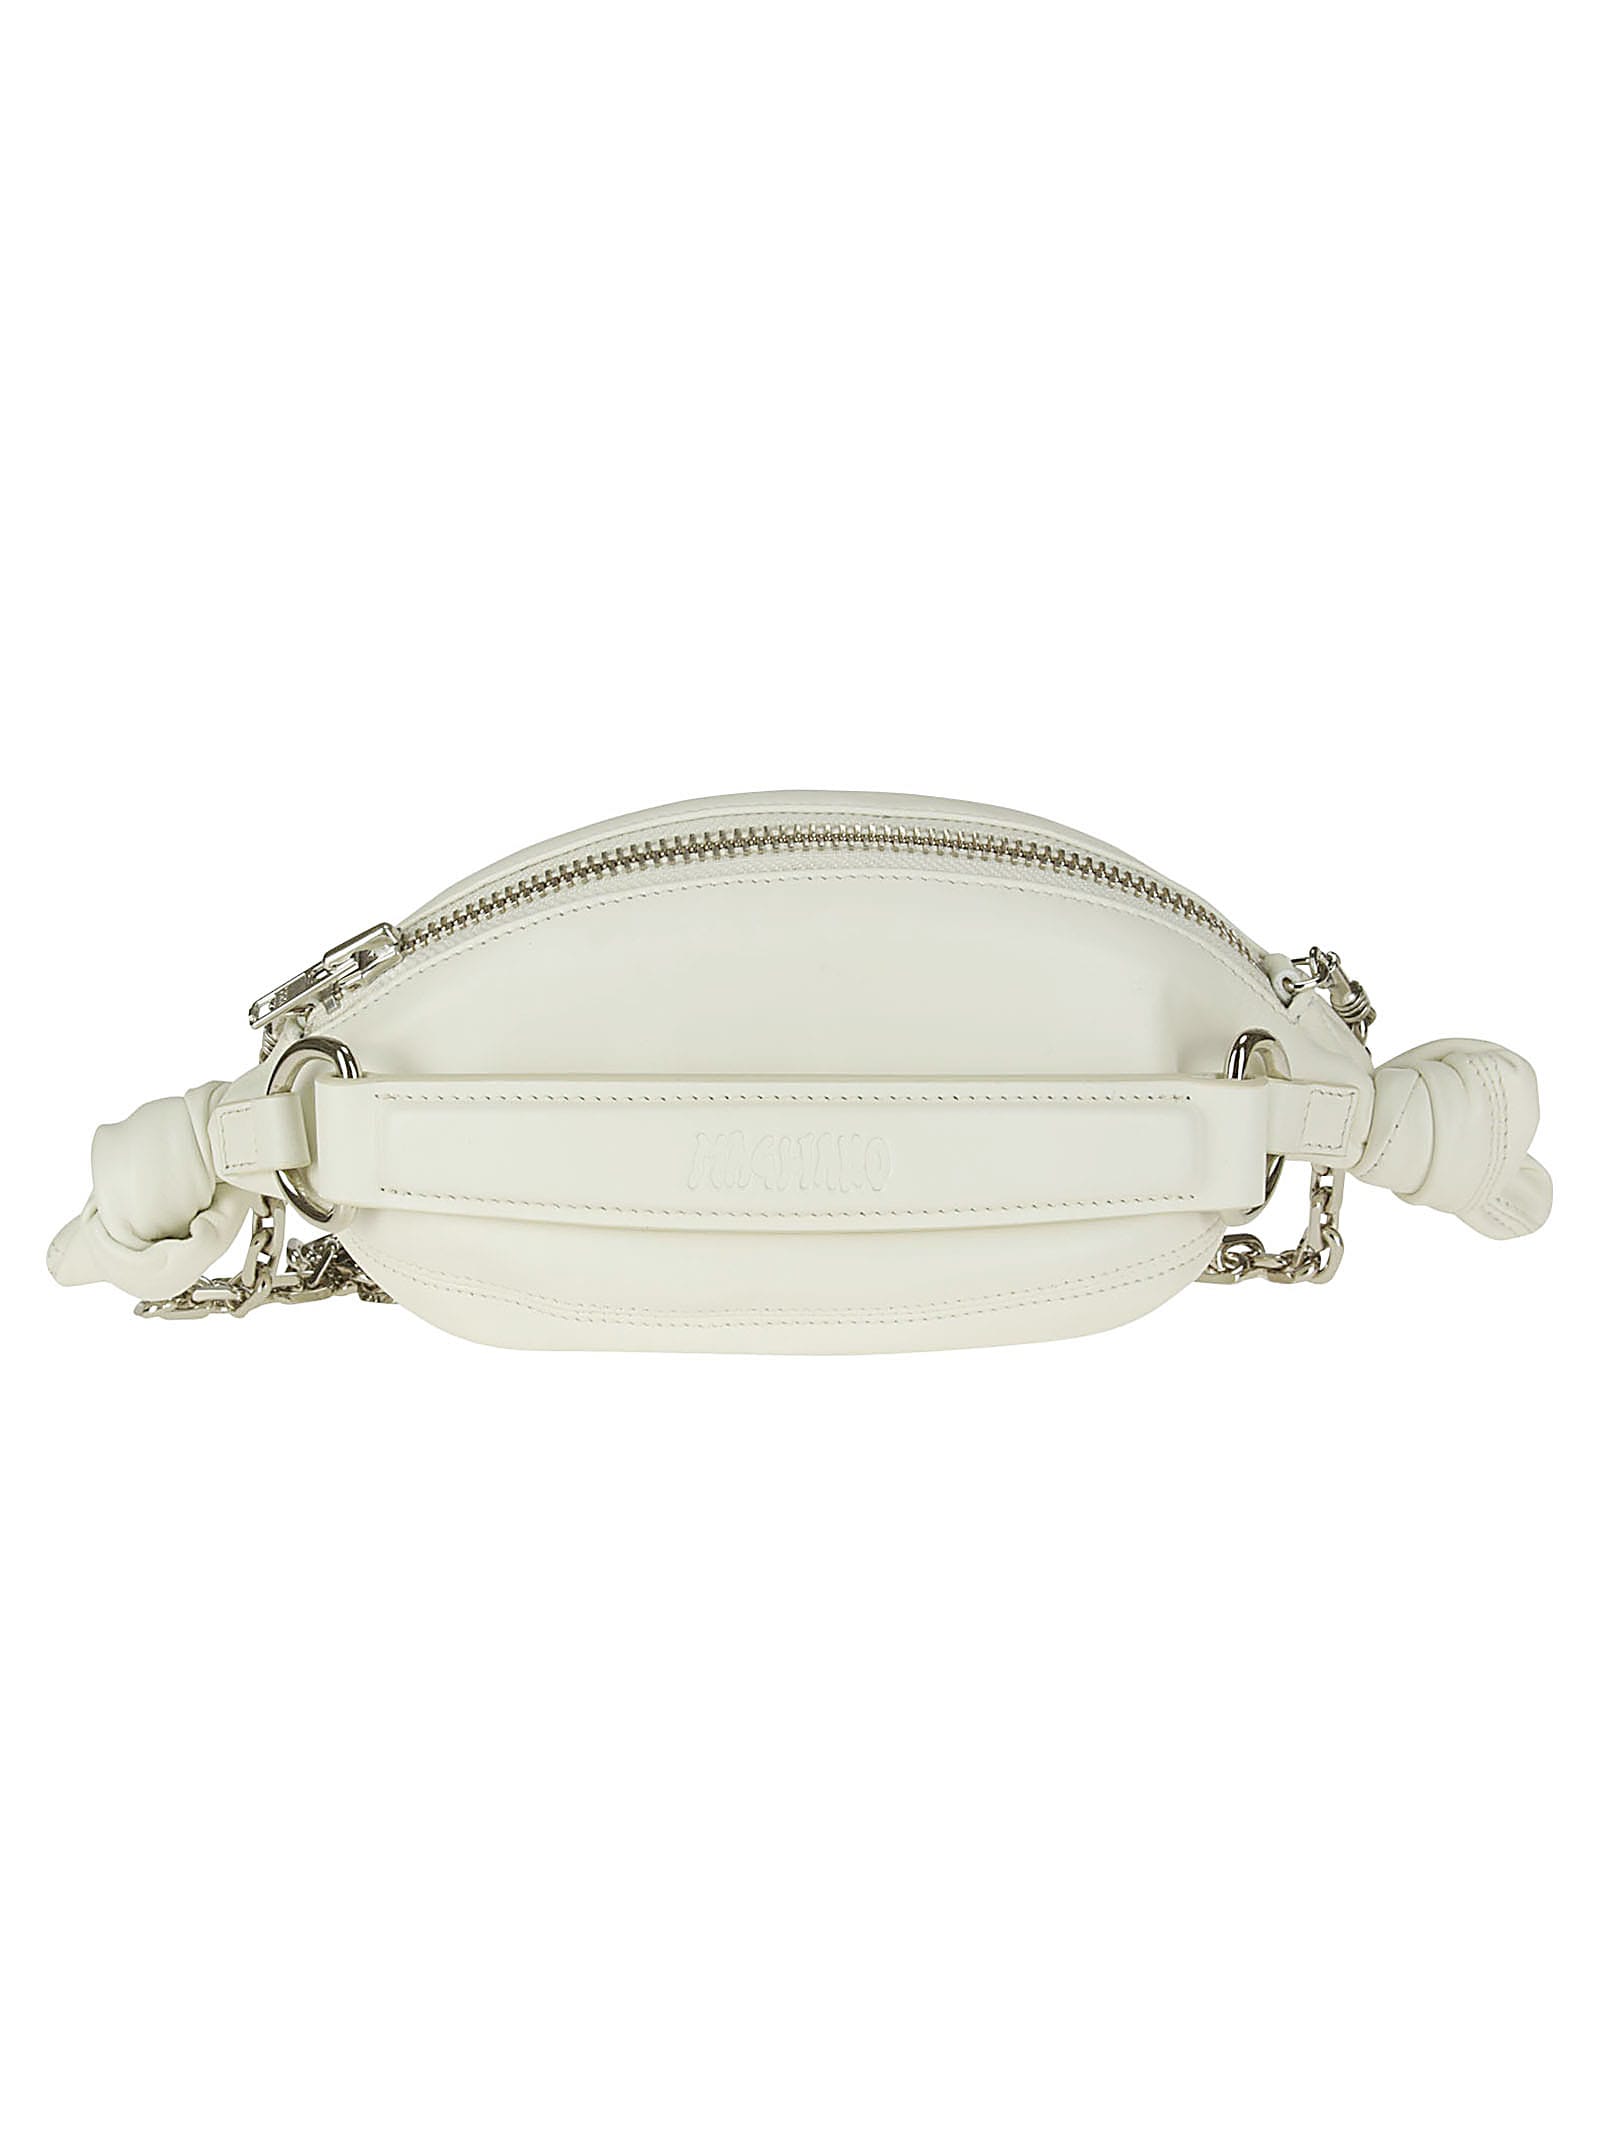 Magliano Candy Candy Bag In Dirty White